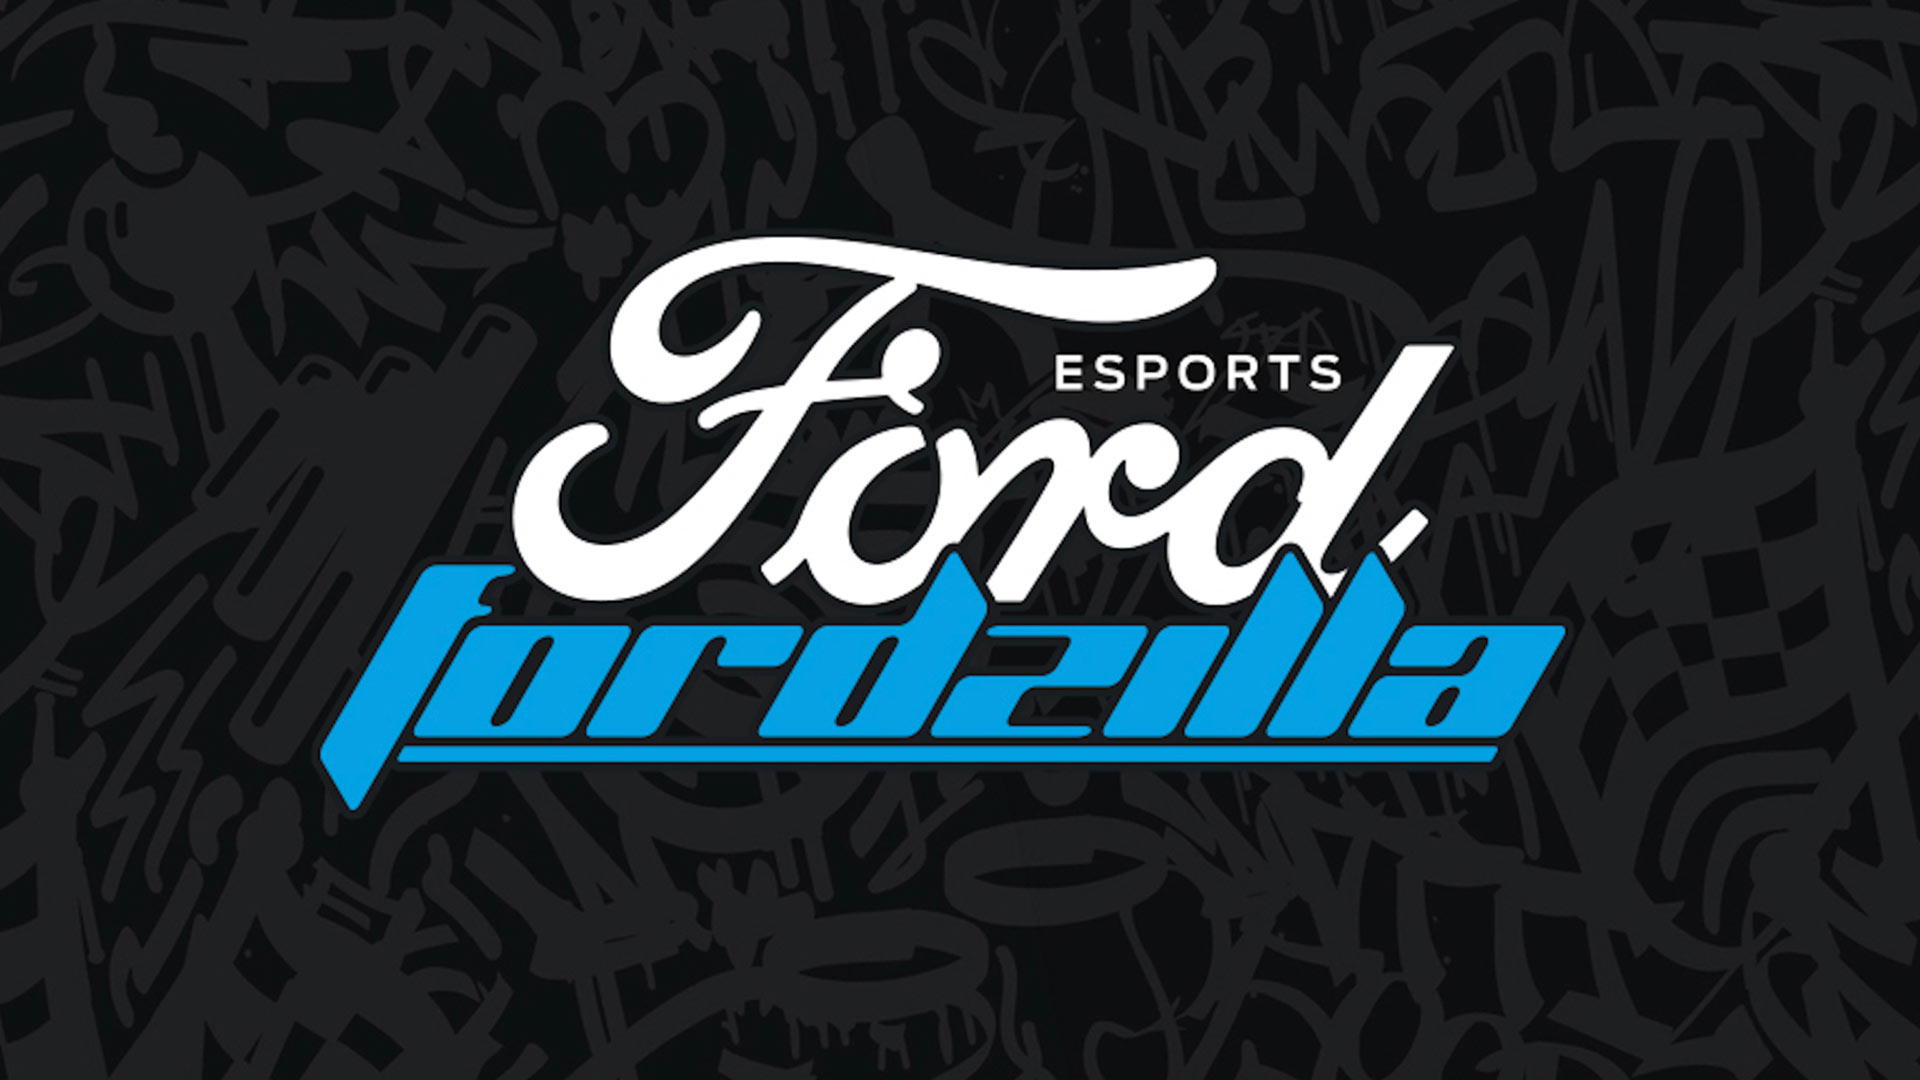 Ford esports team for virtual racing